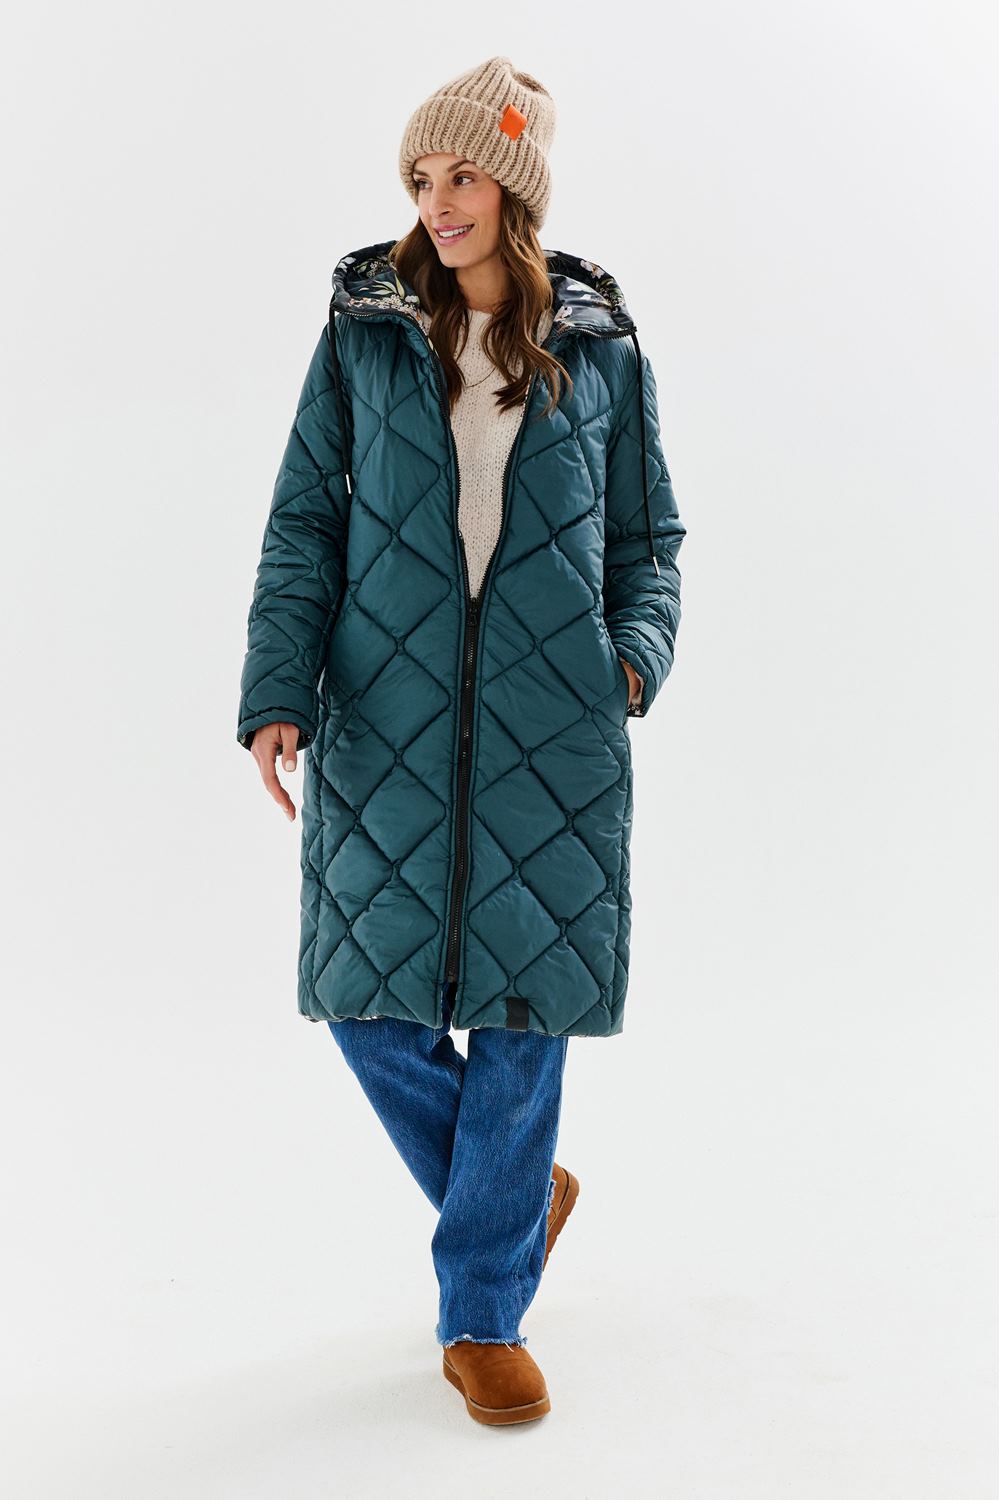 Silver Mist double-sided quilted coat